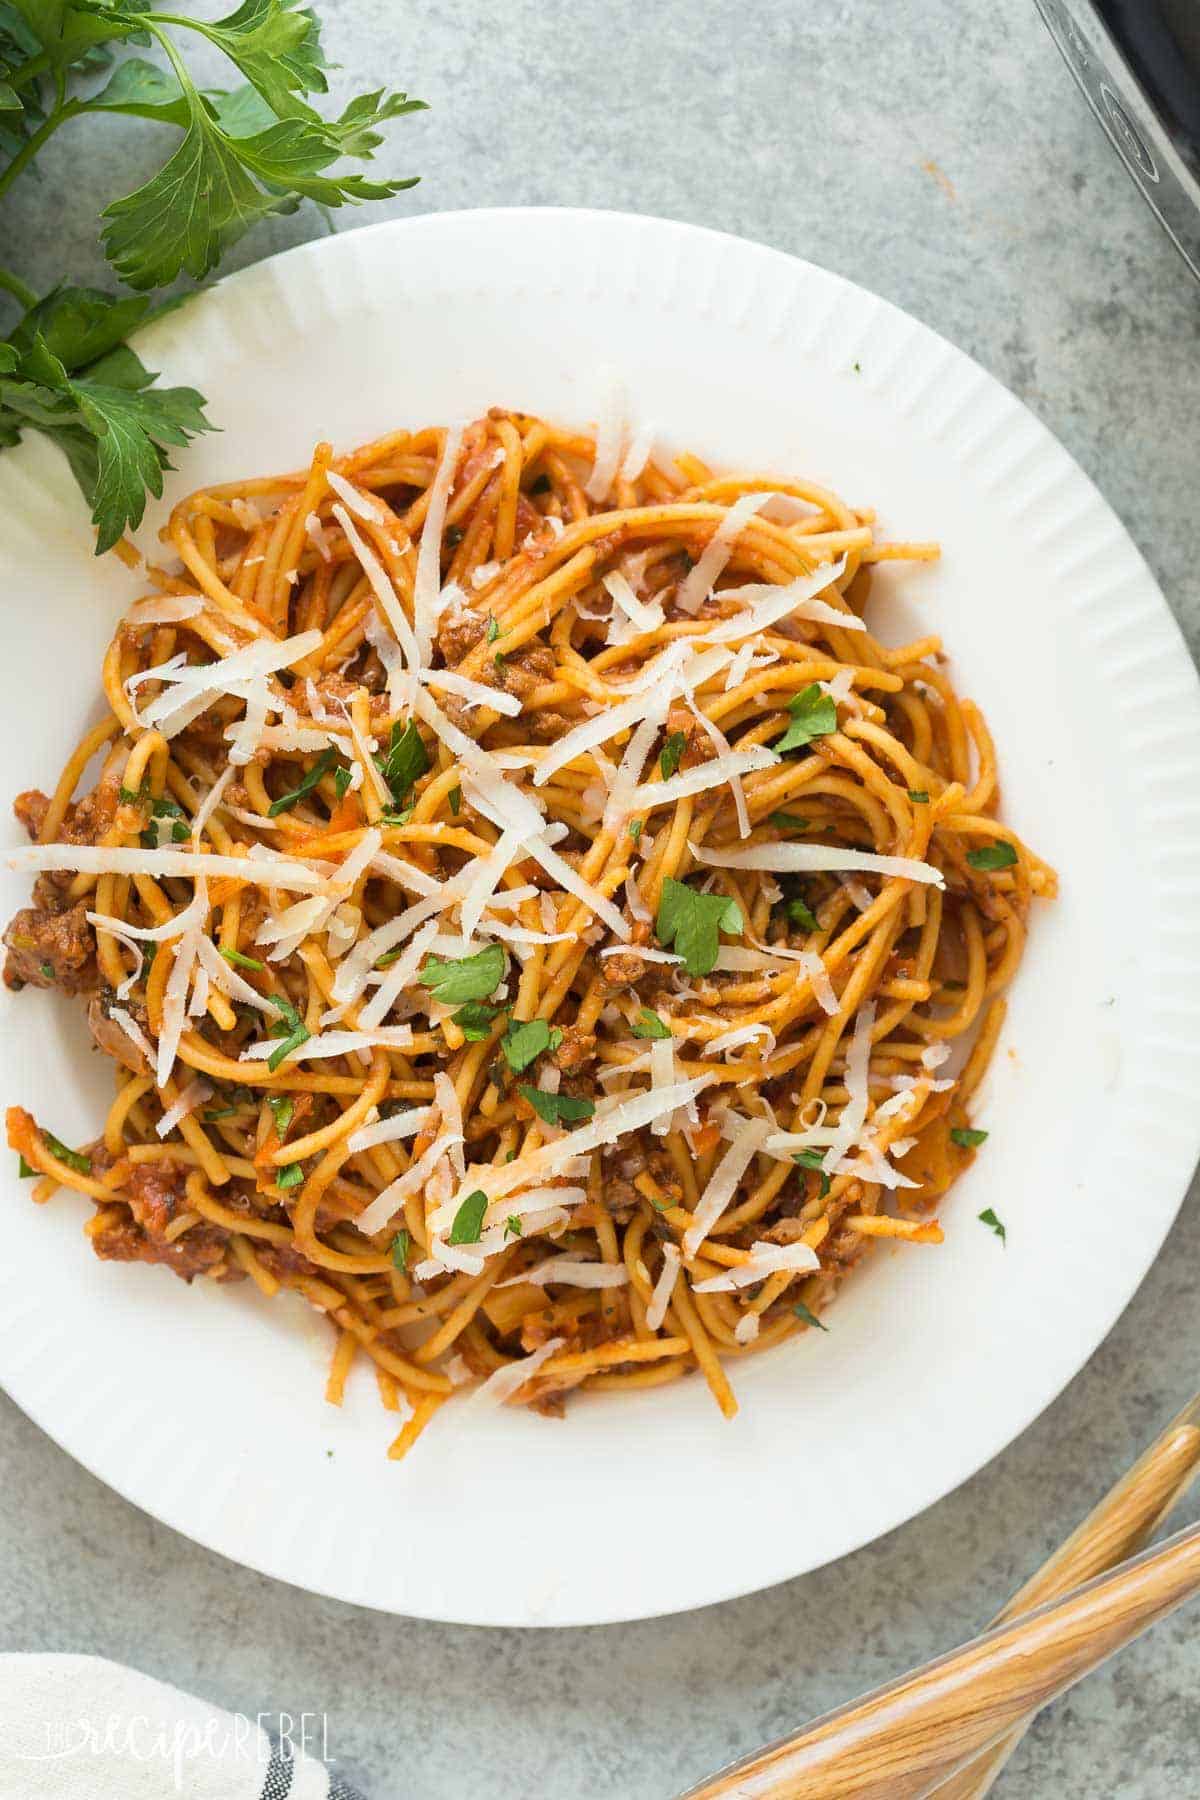 This Healthier Slow Cooker Spaghetti and Meat Sauce is loaded with veggies and protein but tastes just like your old favorite! It cooks completely in the slow cooker -- even the pasta! Includes step by step recipe video. | slow cooker recipe | crock pot recipe | crock pot dinner | ground beef recipe | healthy dinner | low calorie | high fiber